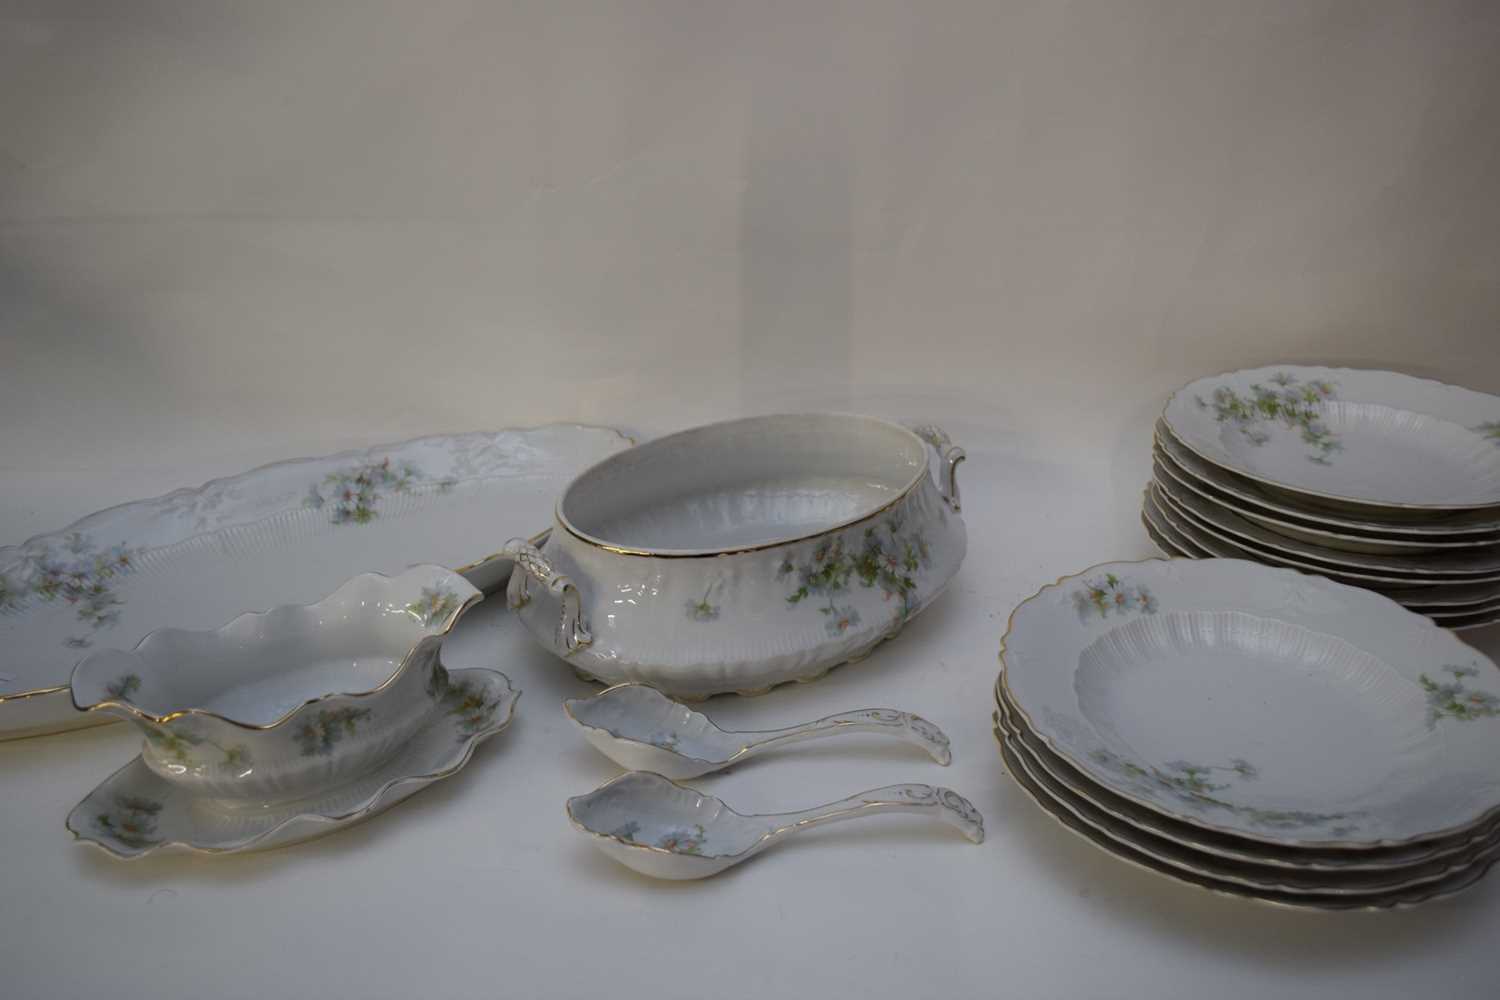 Extensive quantity of Carl Thieme Altwasser dinner wares comprising dinner plates, side plates, - Image 3 of 3